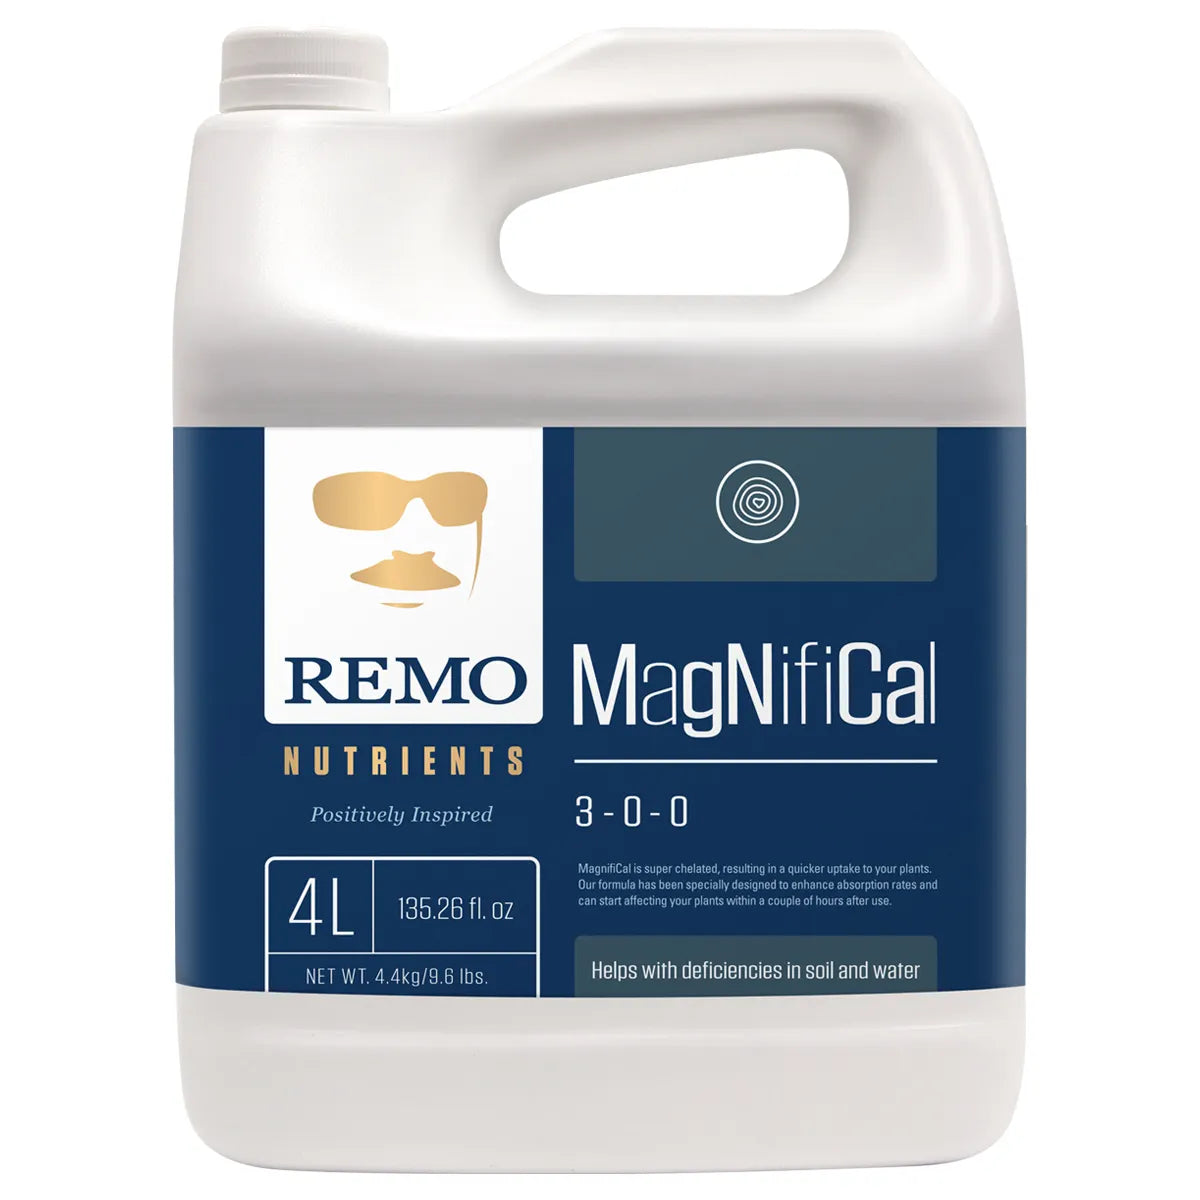 Remo's Nutrients - Magnifical Nutrient